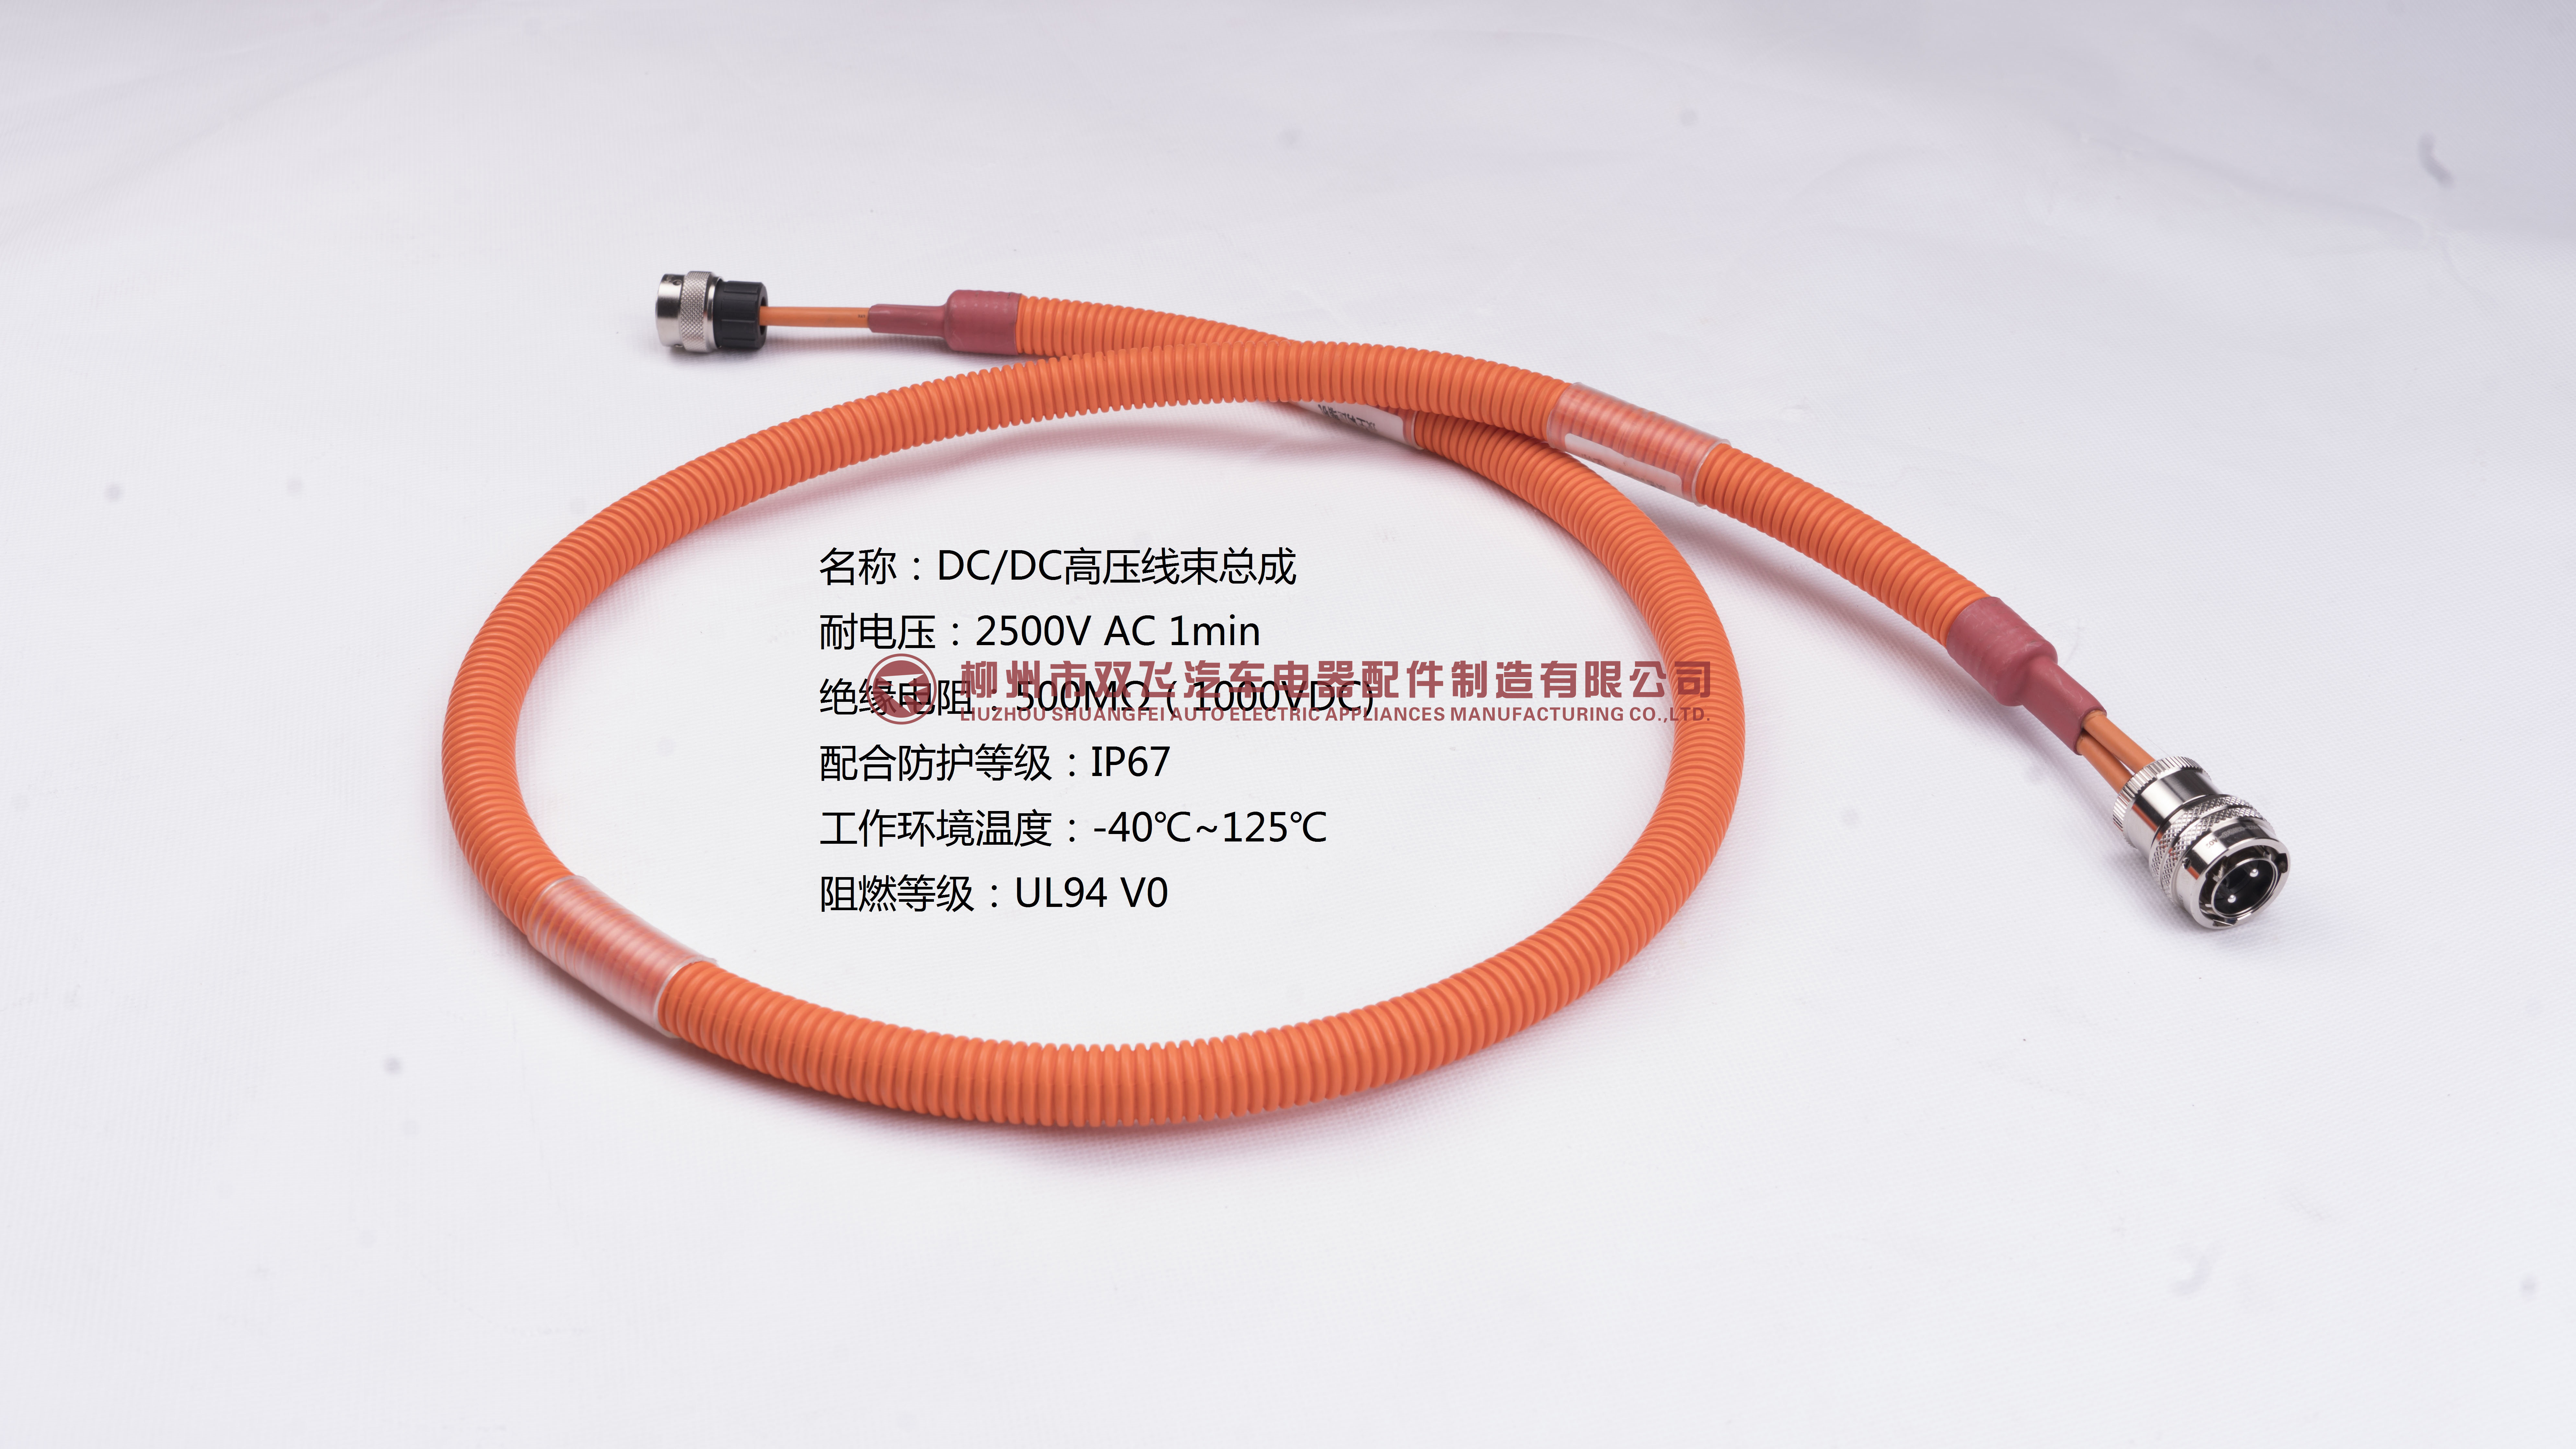 DC DC High-voltage wire harness